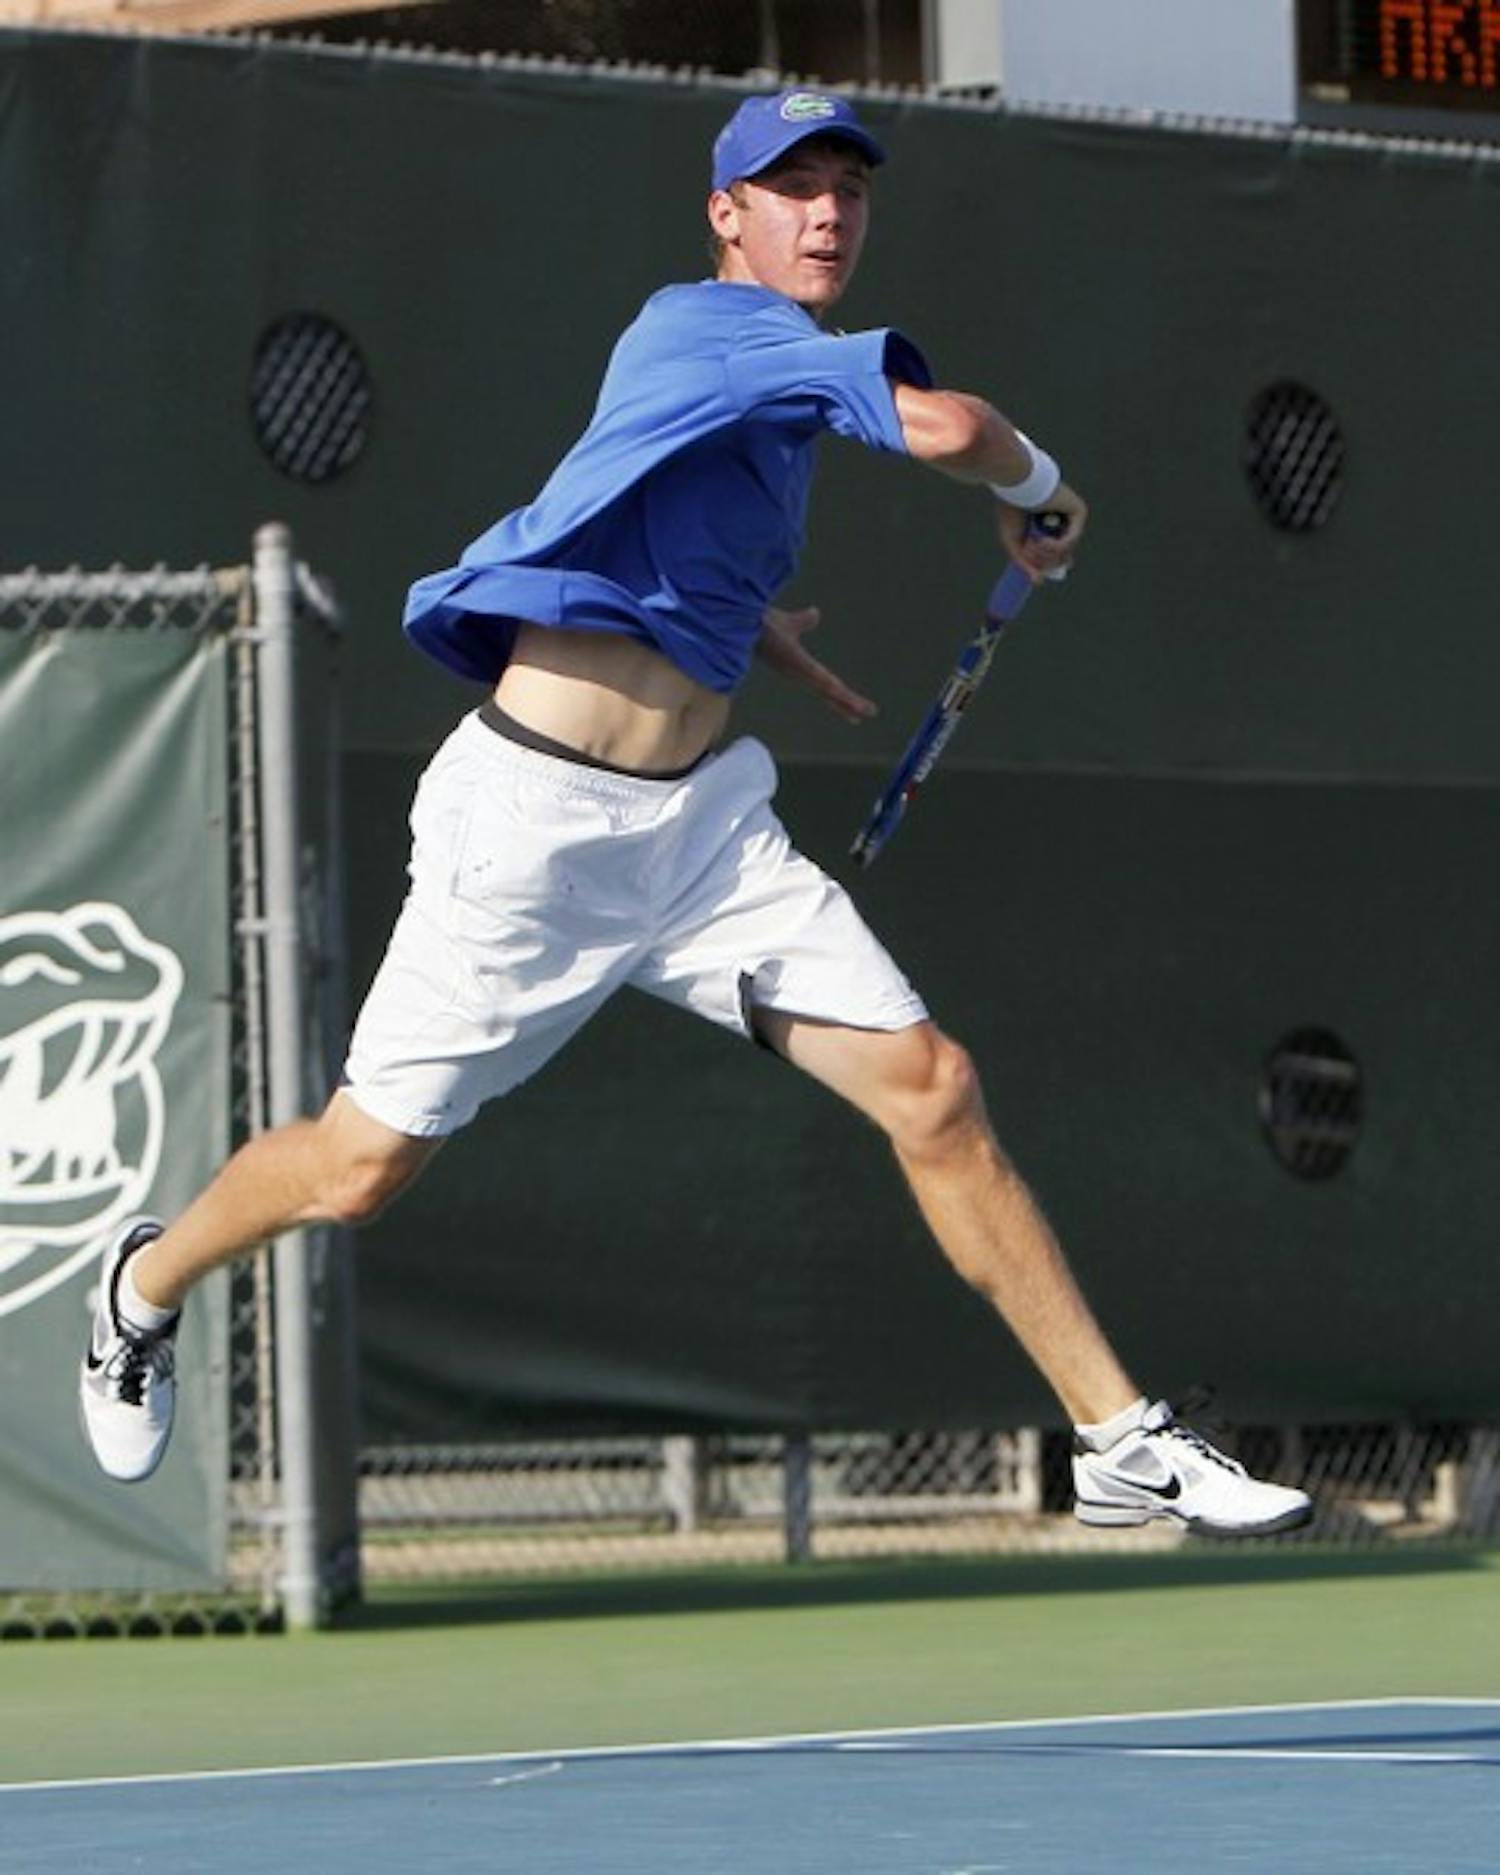 Florida junior tennis player Bob van Overbeek said this weekend’s match against No. 2 Virginia will serve as a gauge for determining just how good the team is this season.